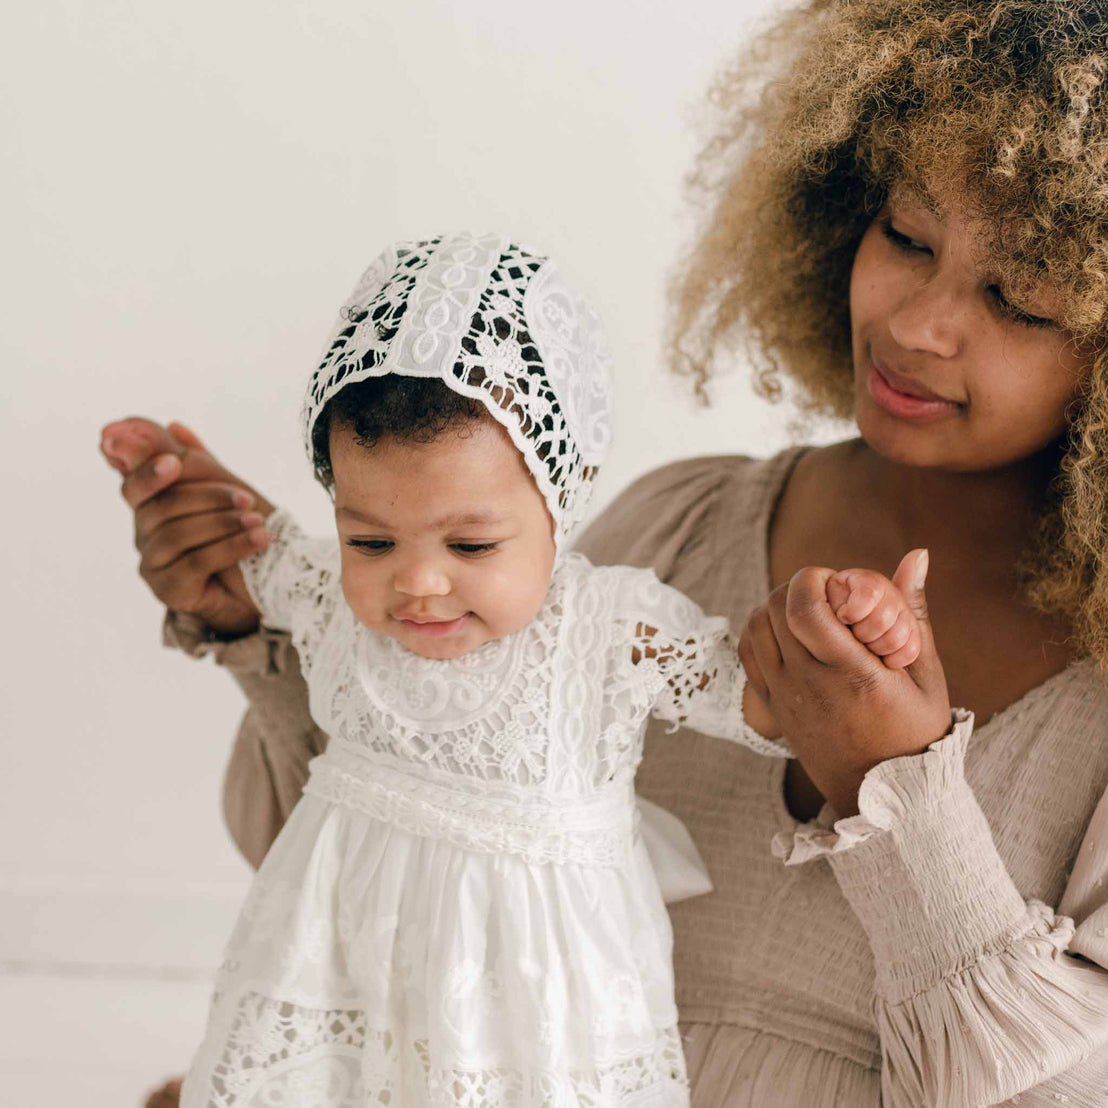 A woman with curly hair, wearing a beige blouse, gently holds the hands of a baby dressed in the Adeline Lace Dress & Bloomers with a matching bonnet. The baby looks down with a curious expression. The plain white background emphasizes their connection.